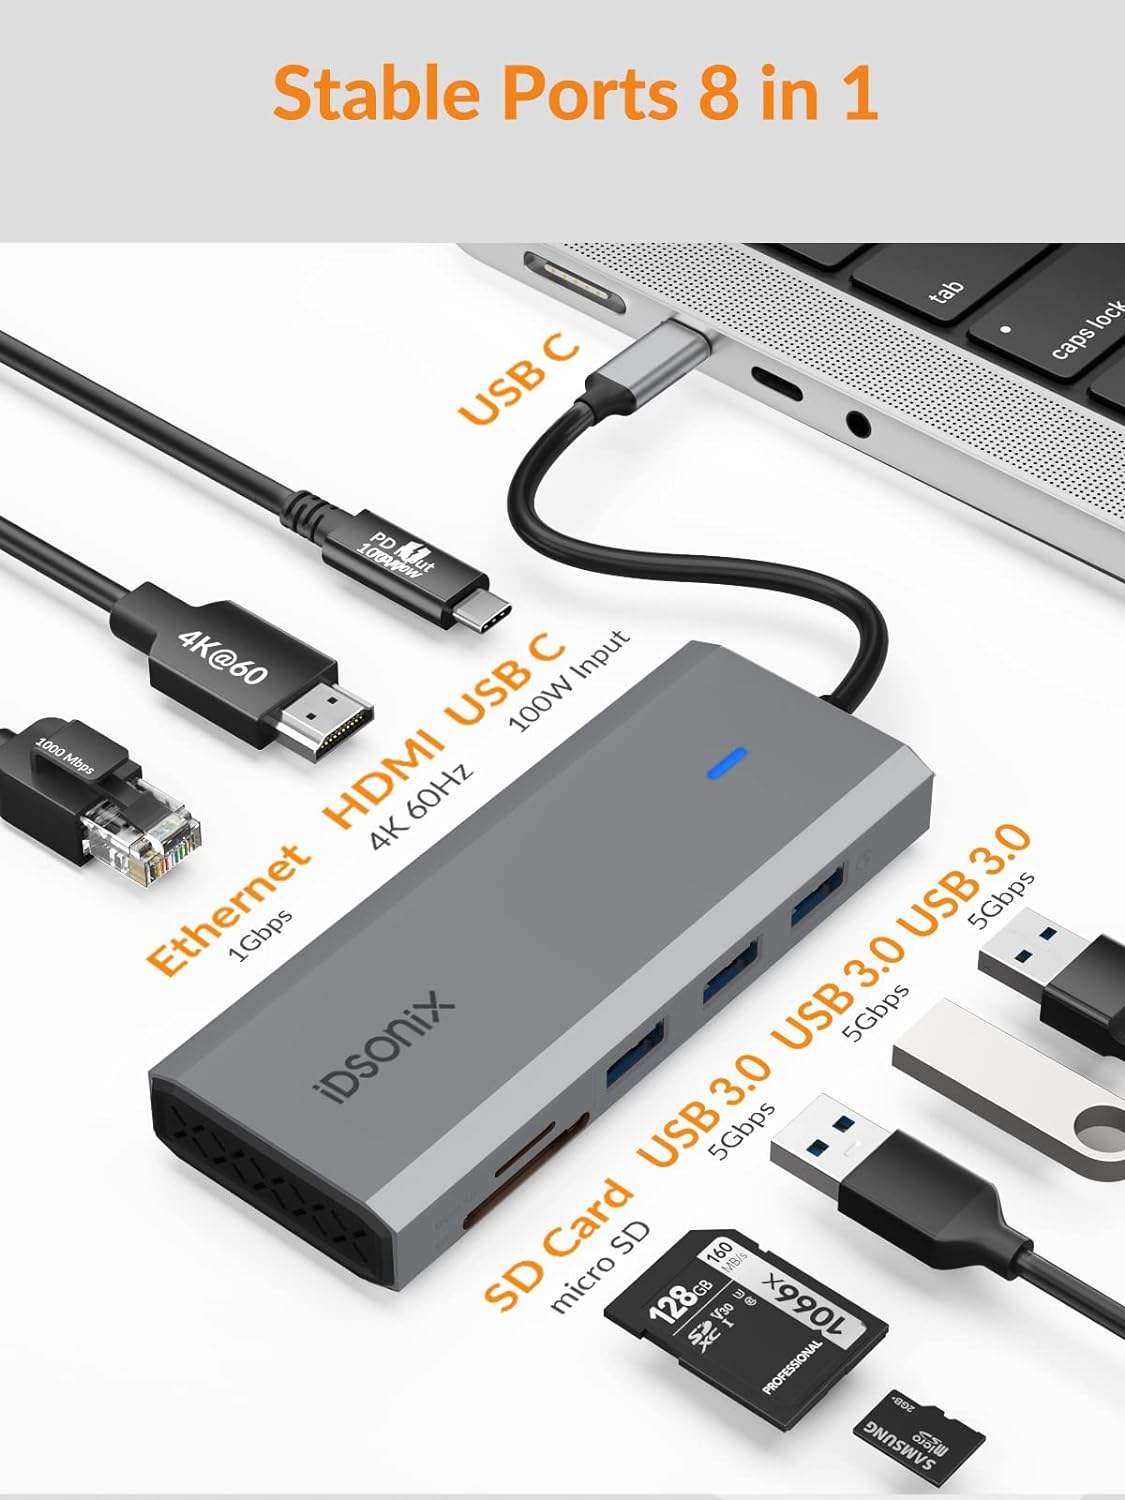 Docking Station - iDsonix 8 in 1 USB C Hub Aluminum Multiport Adapter with HDMI 4K@60Hz, PD 100W, 1Gigabit Ethernet, SD/TF Card Reader for MacBook Air/Pro iPad Dell/Hp Laptop and More